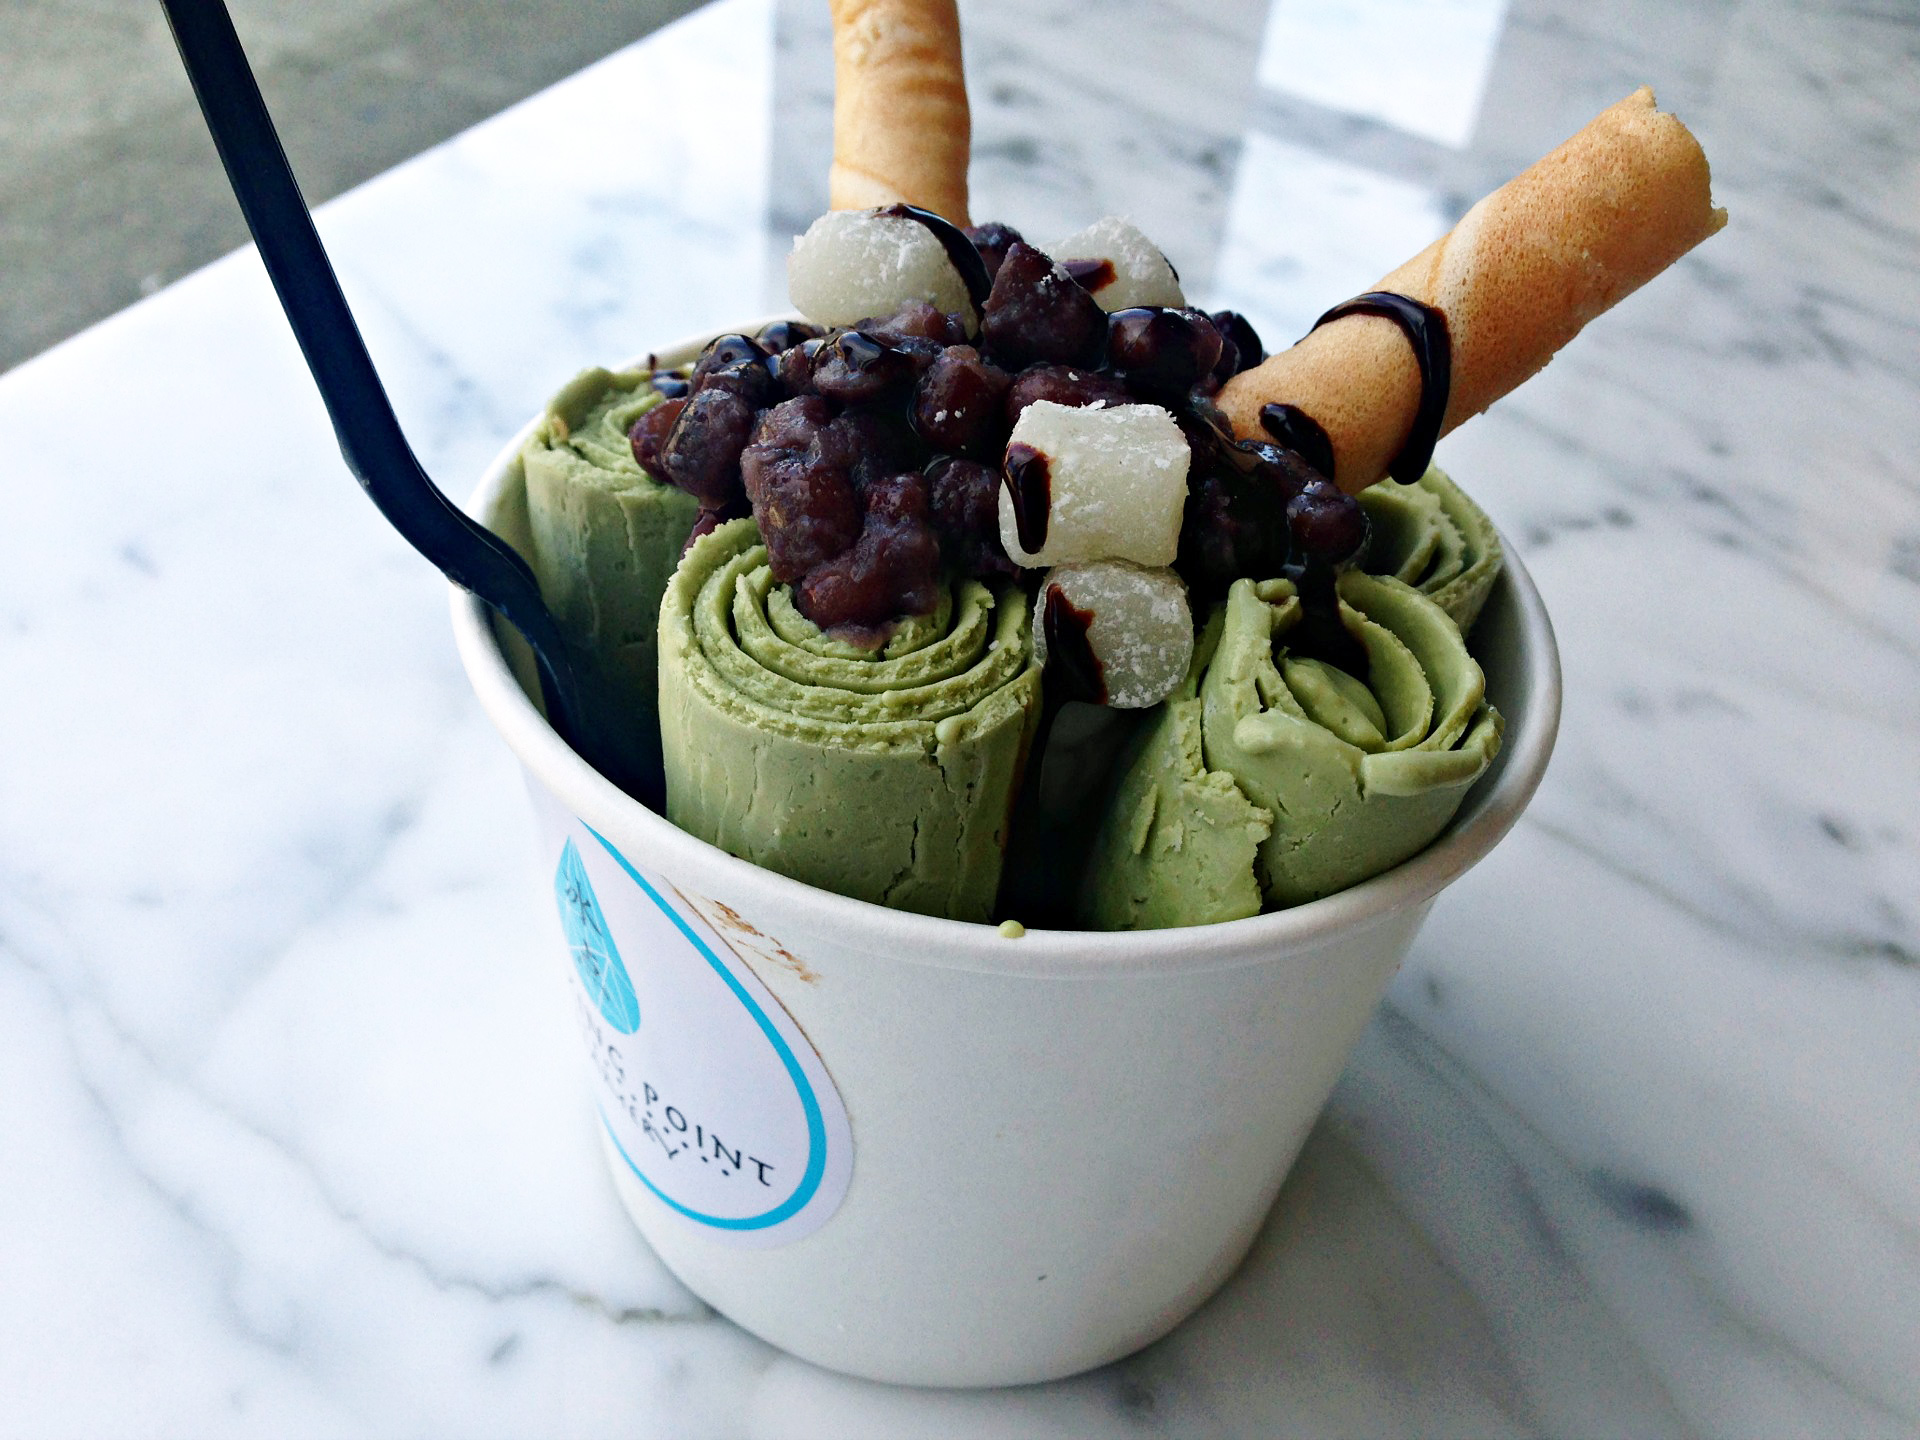 A matcha ice cream roll from Oakland's Freezing Point.